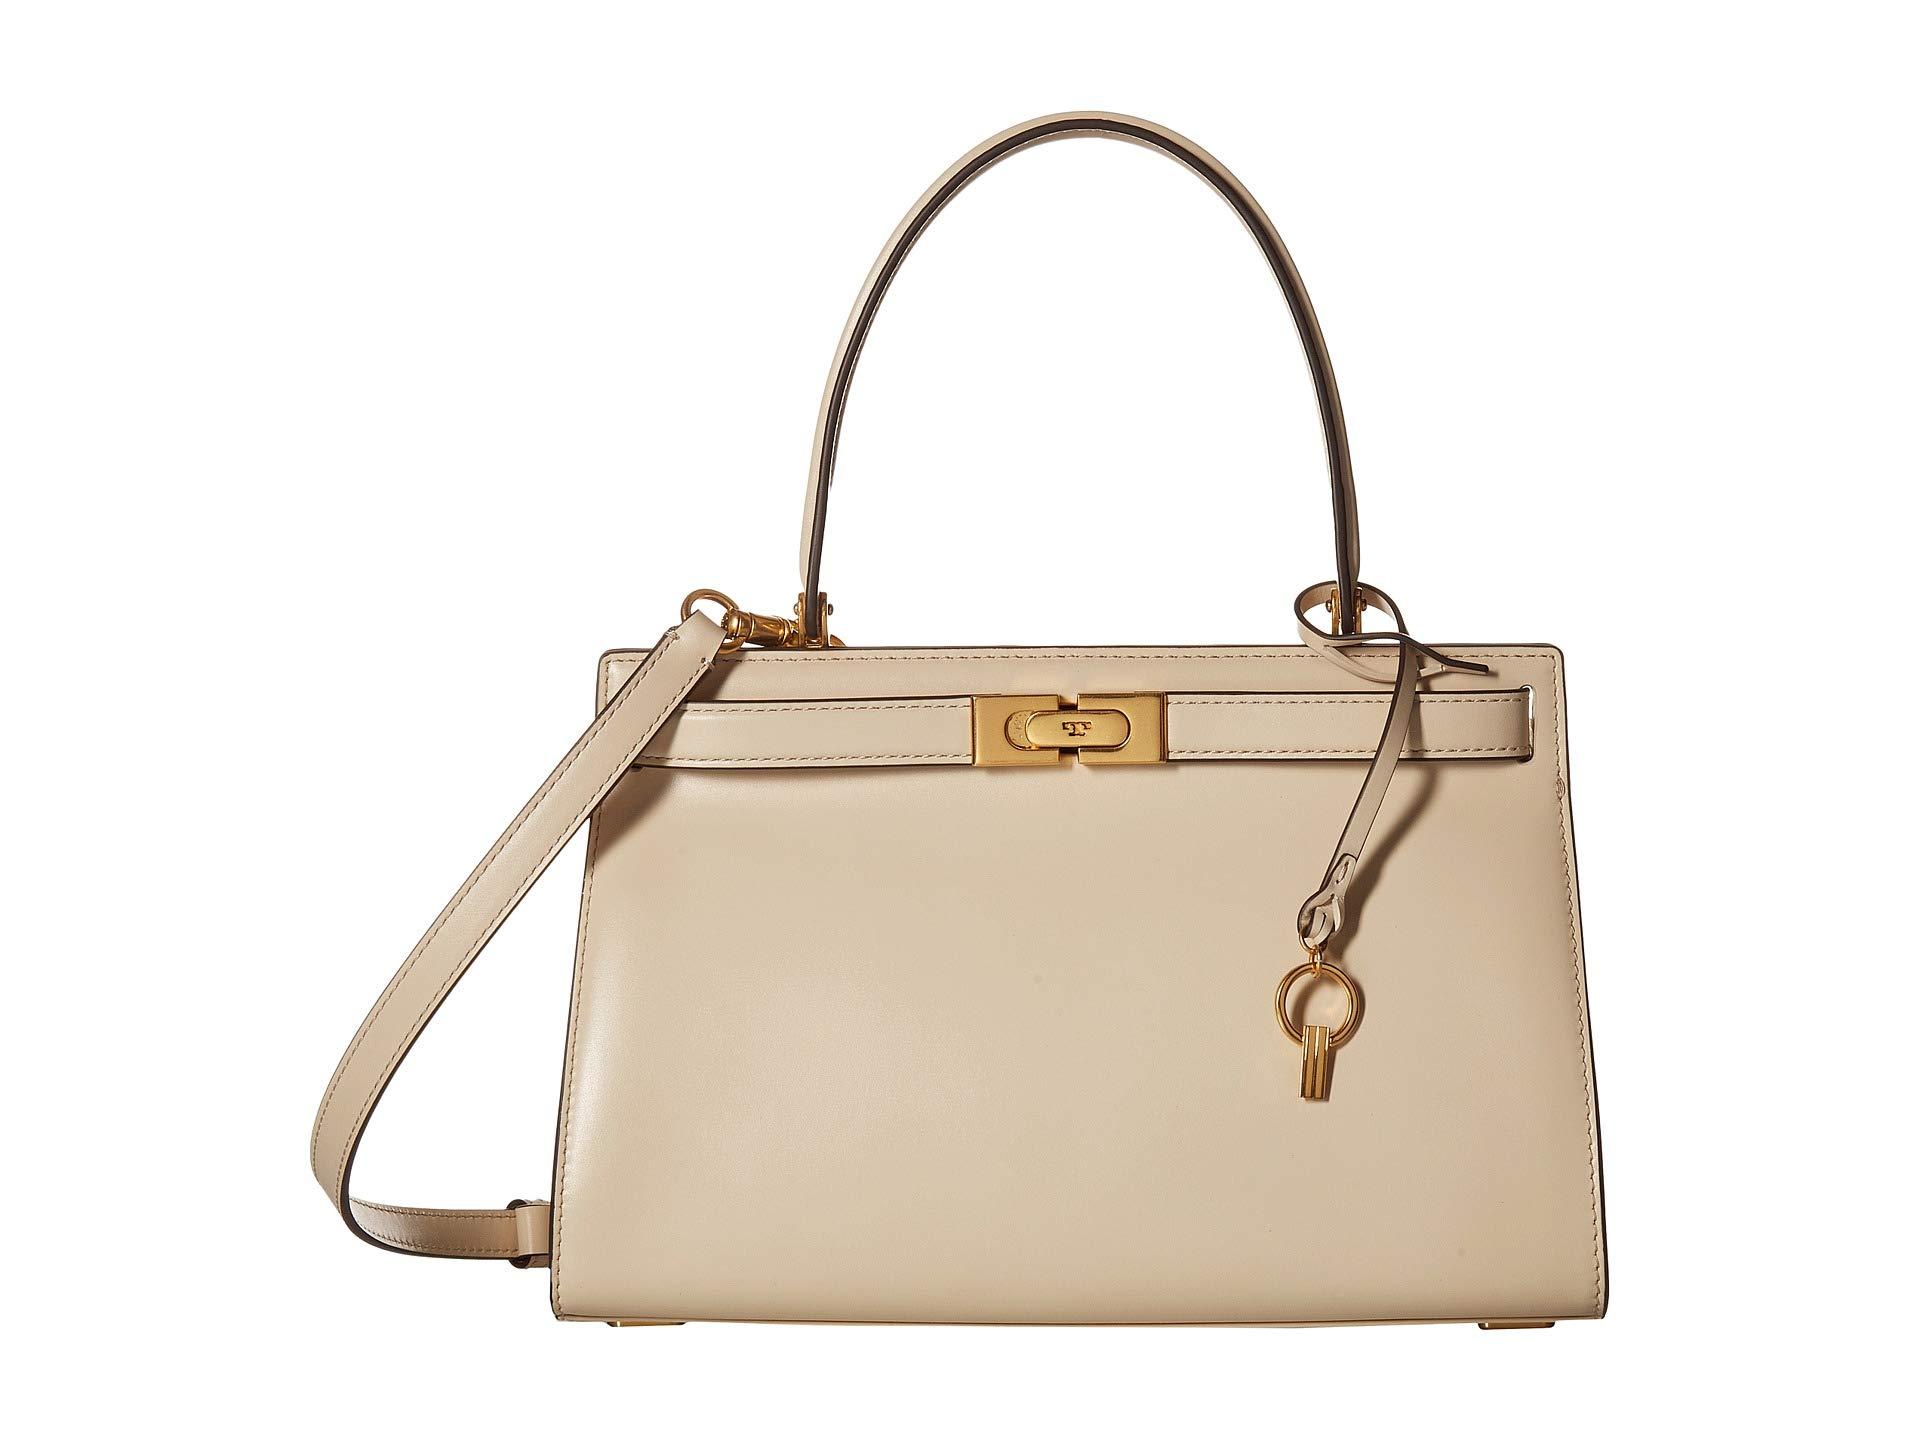 Tory Burch Lee Radziwill Small Bag in Natural - Lyst